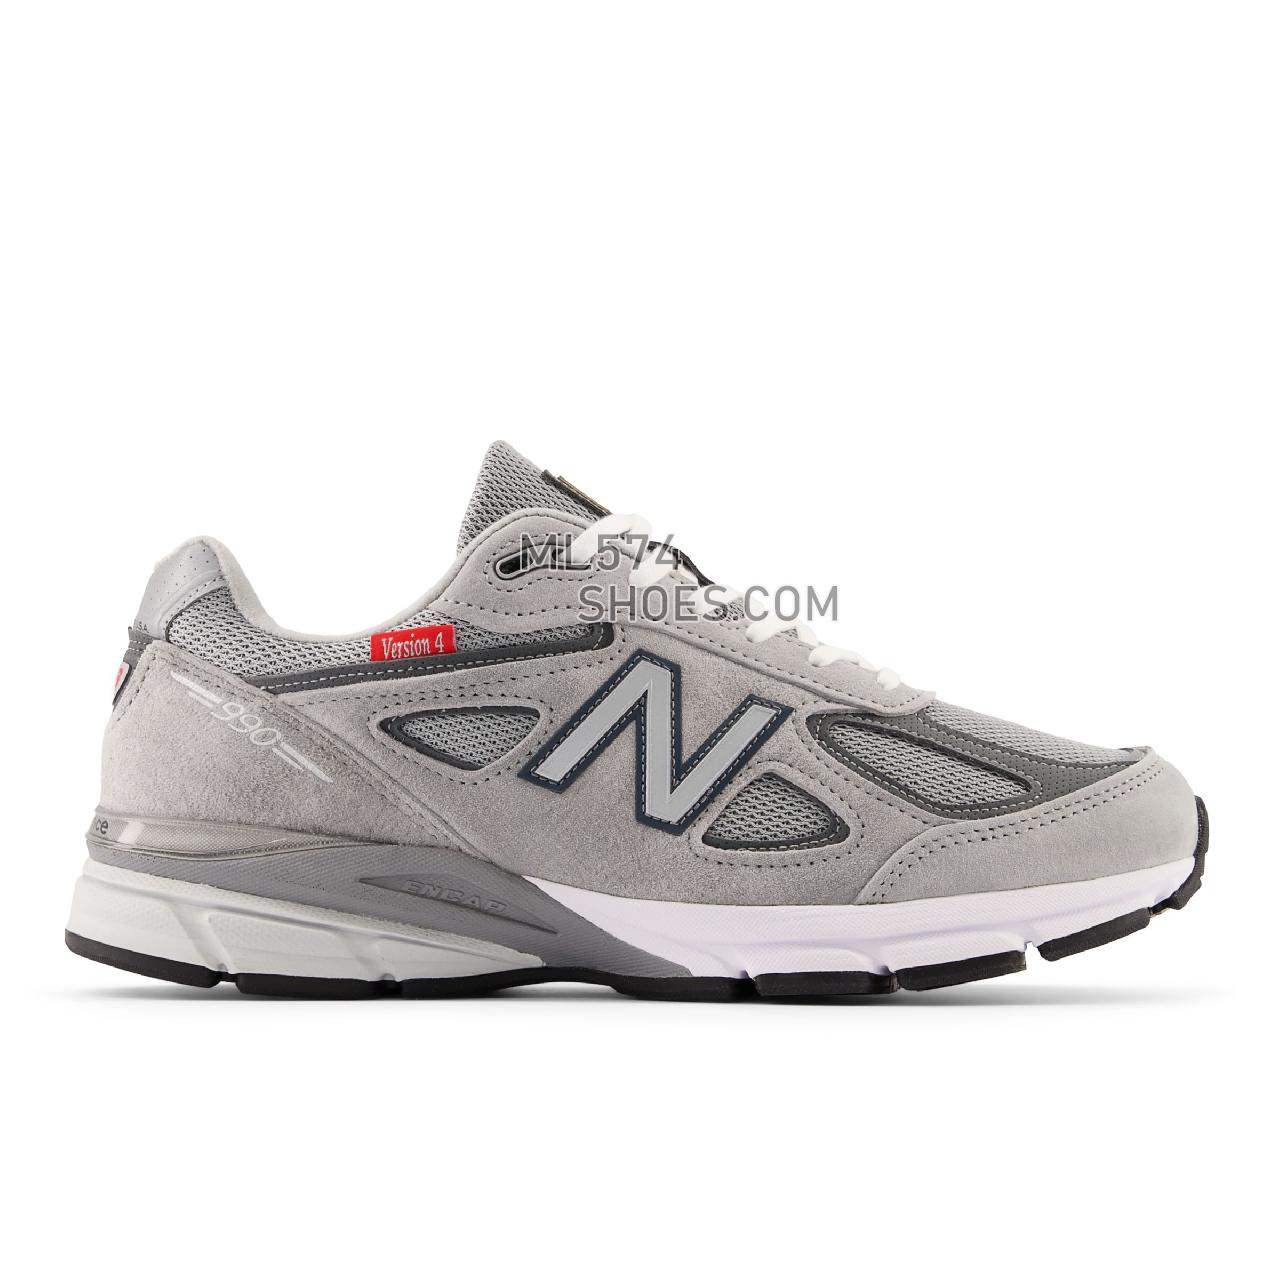 New Balance Made in US 990v4 - Unisex Men's Women's Neutral Running - Grey with Red - M990VS4